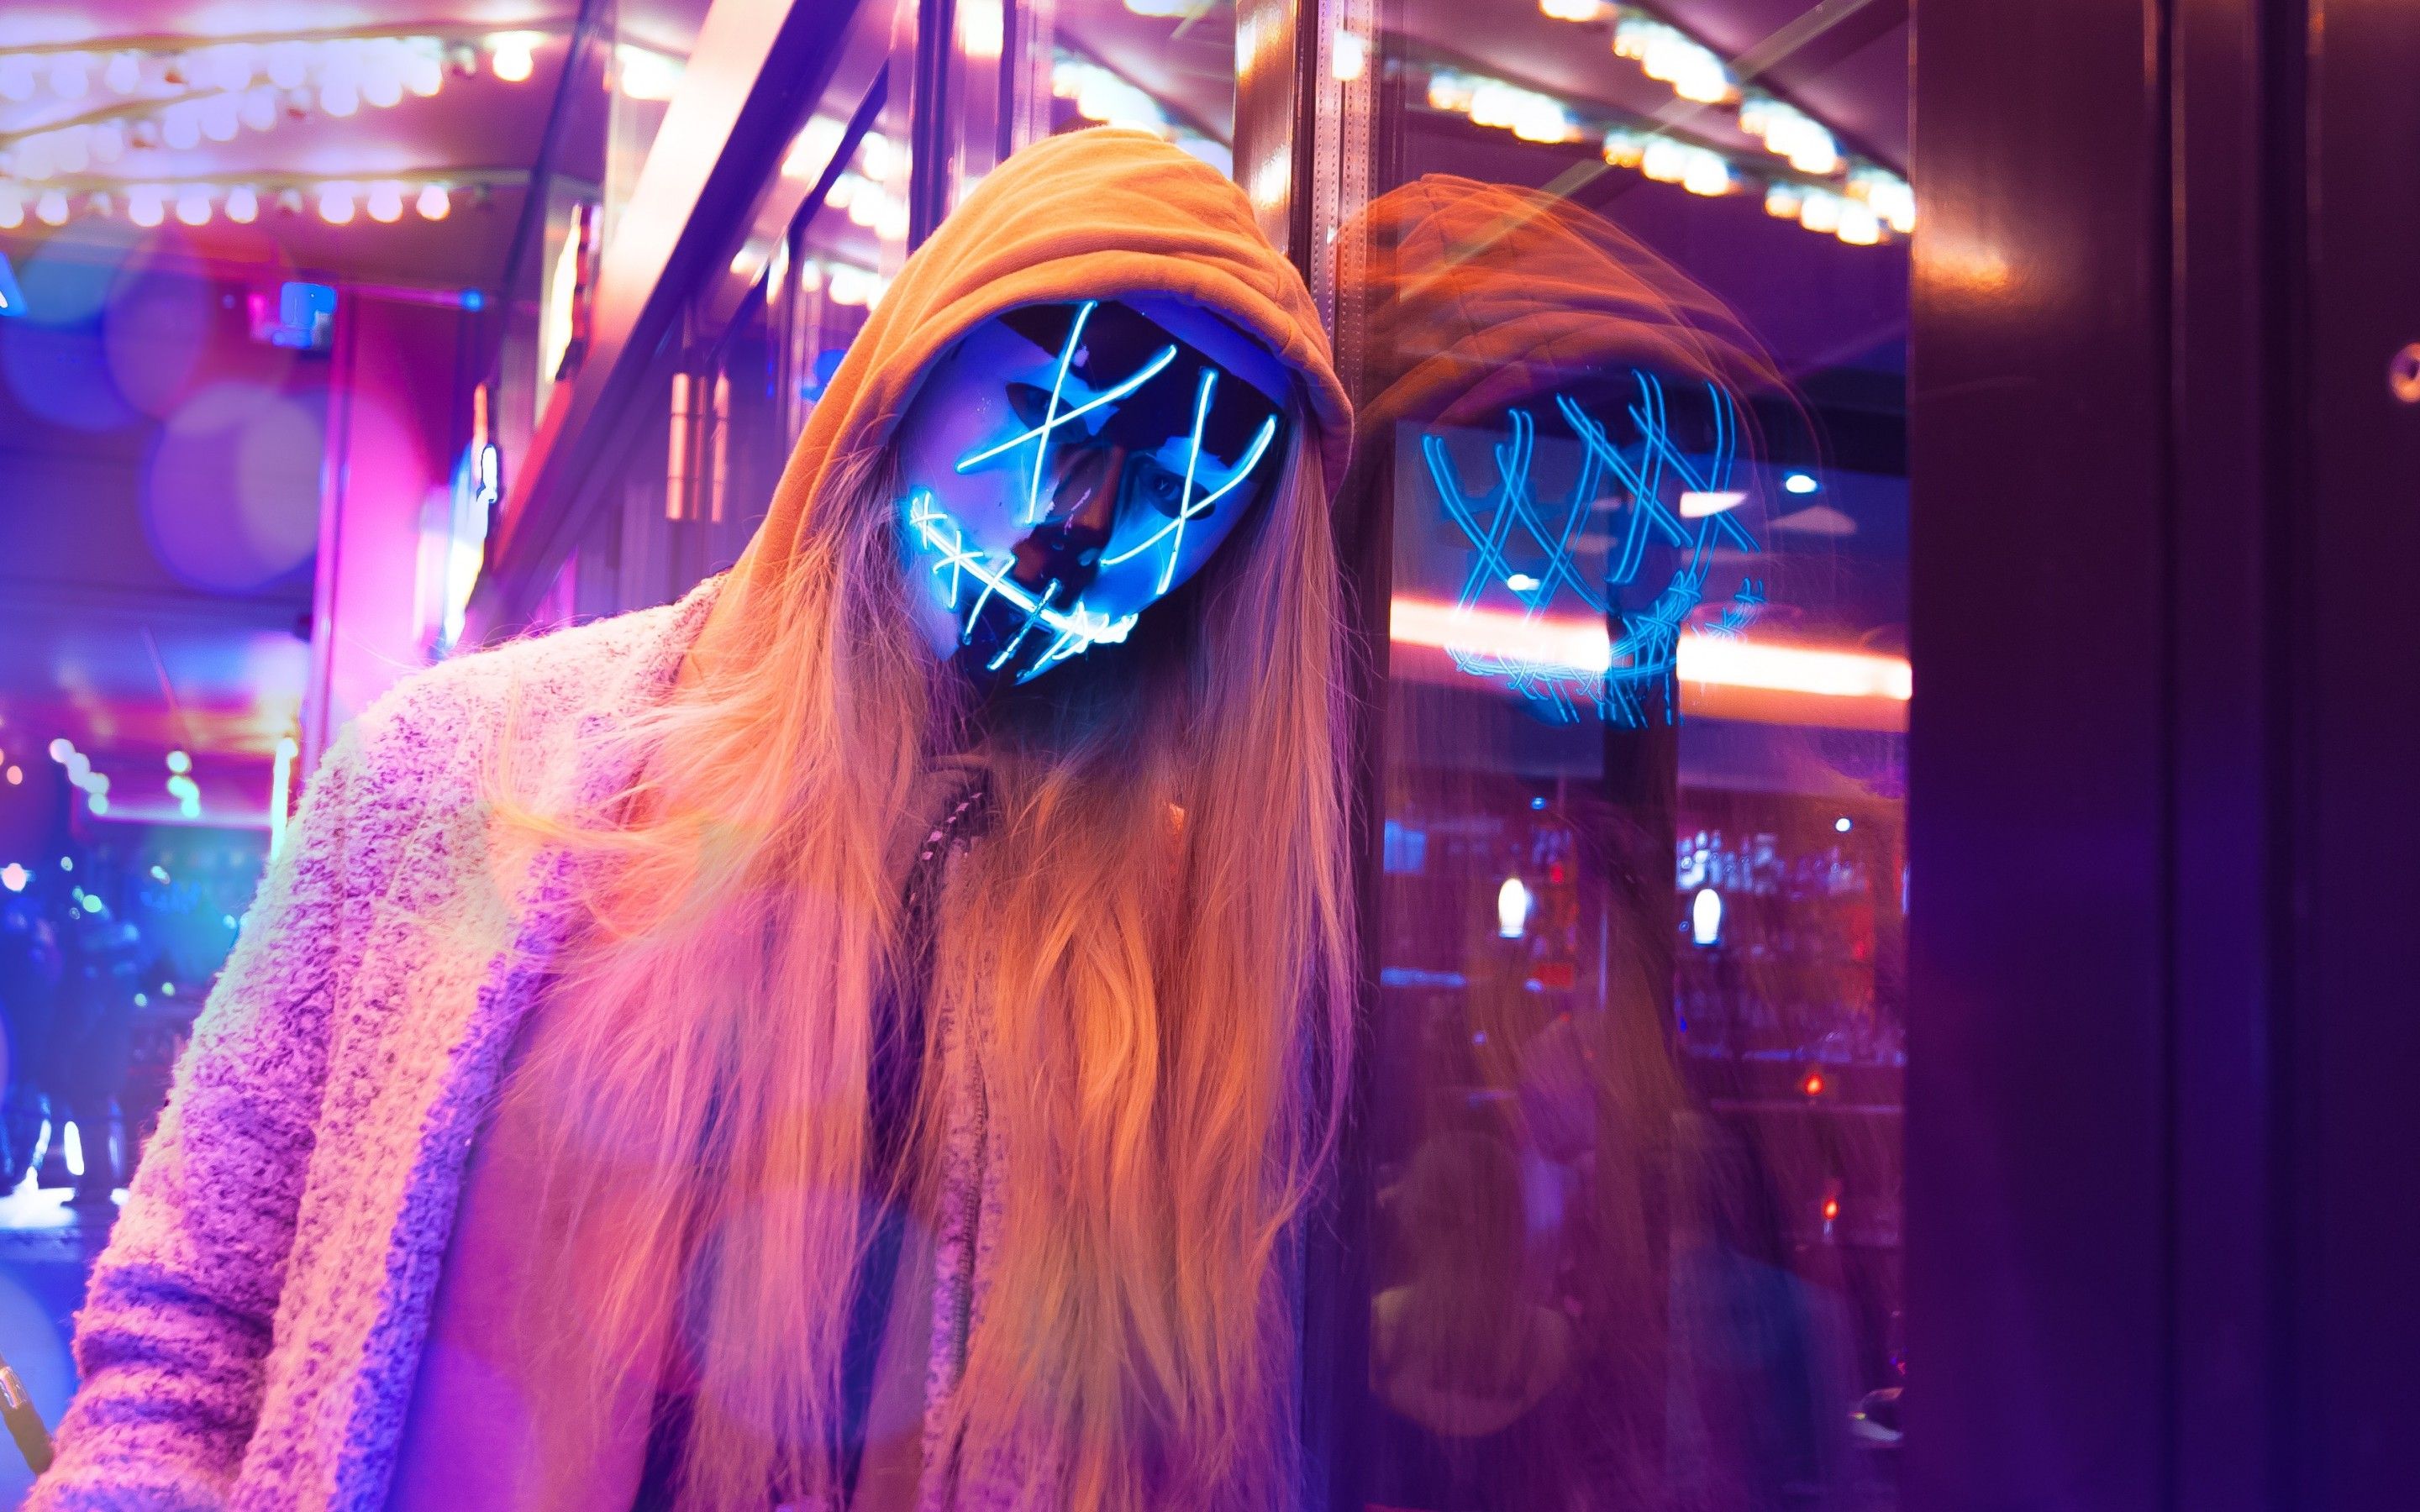 LED mask 4K Wallpaper, Neon, Pink, Anonymous, Woman, Aesthetic, Photography